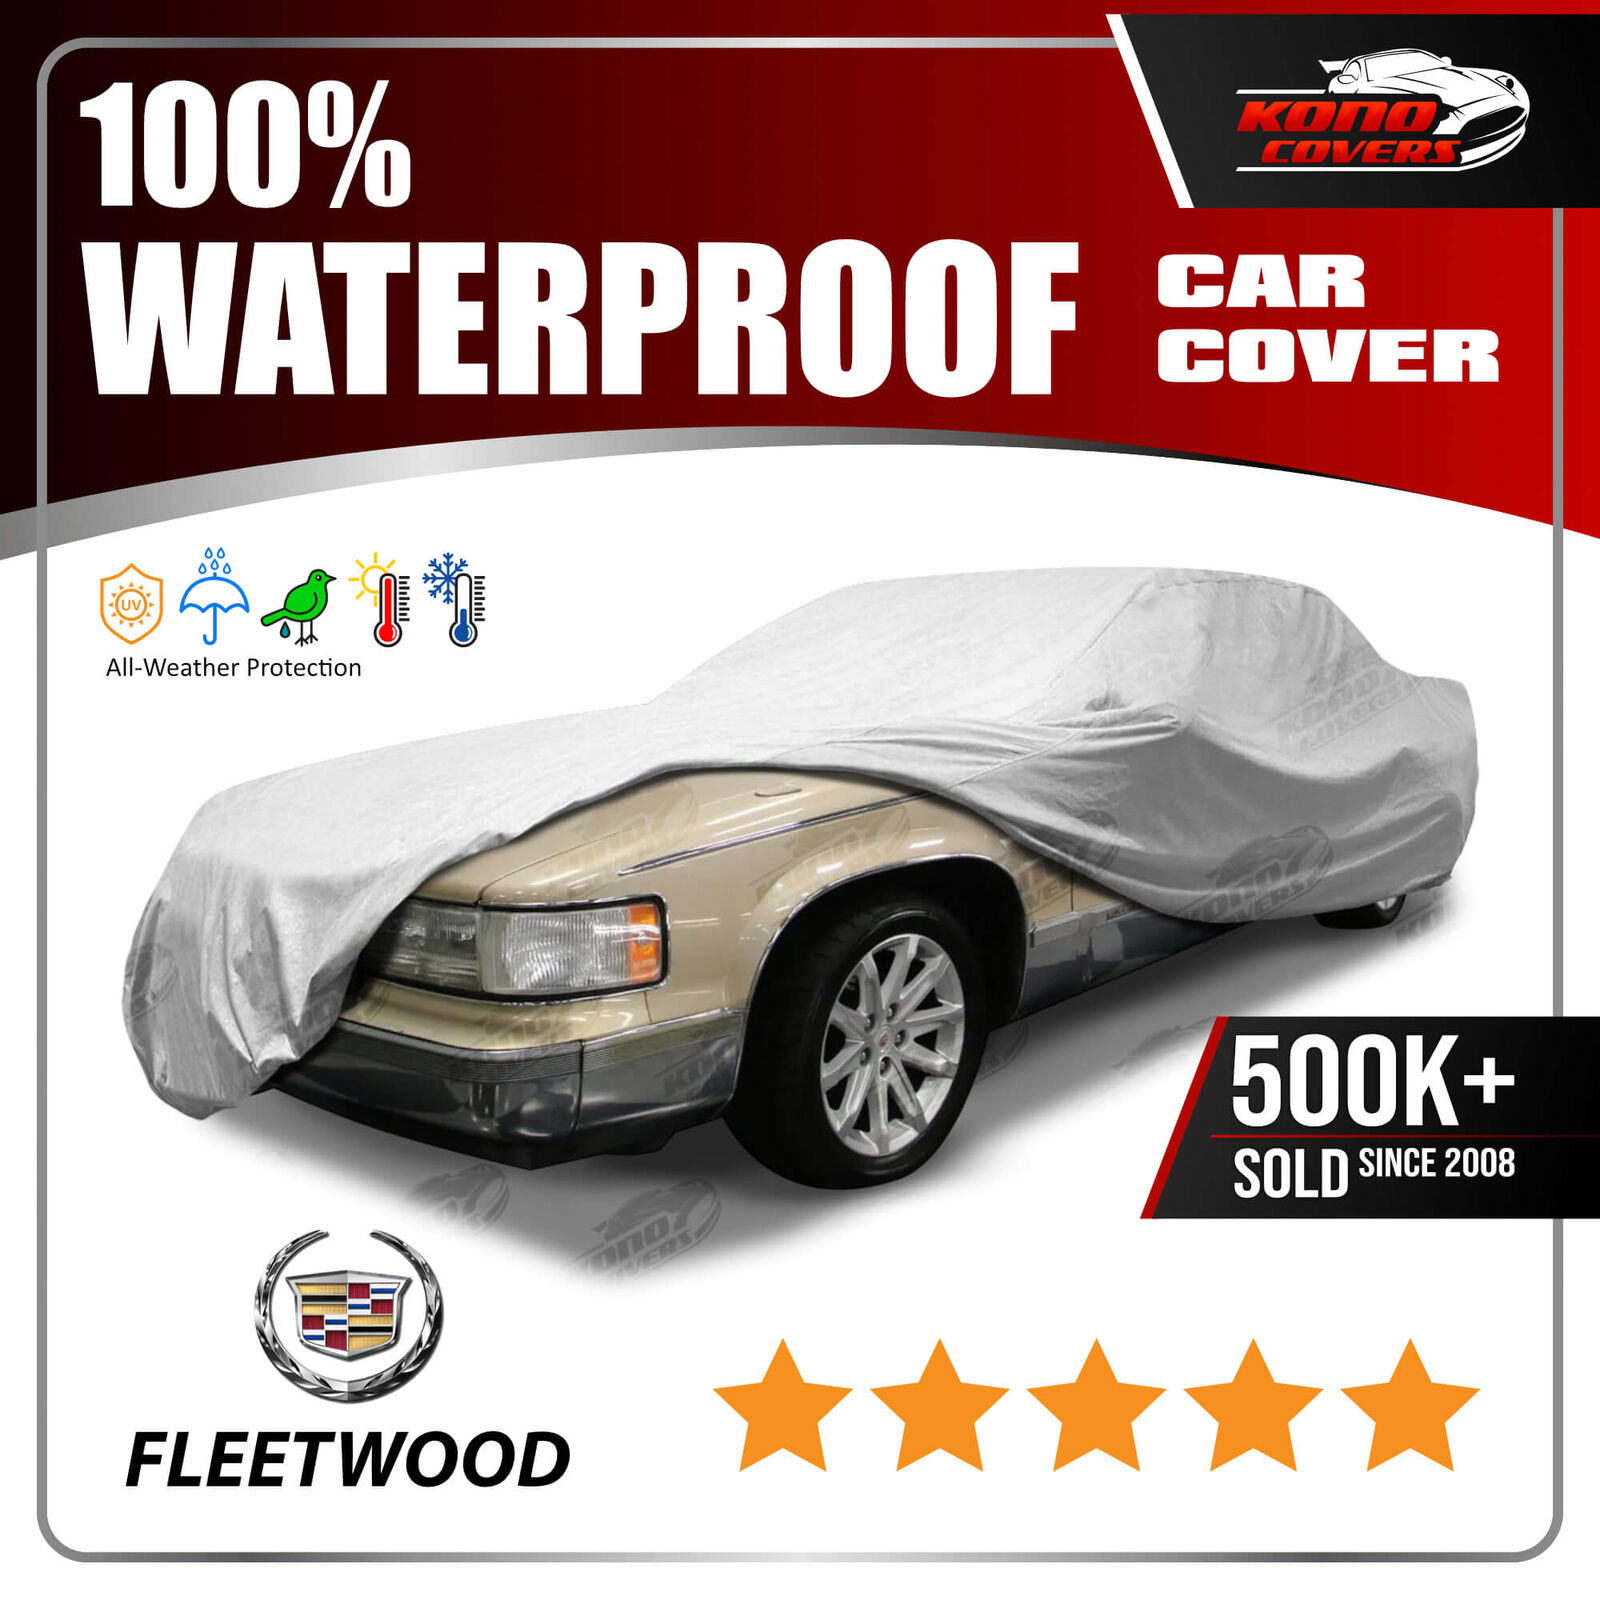 [CADILLAC FLEETWOOD] CAR COVER - Ultimate Full Custom-Fit All Weather Protect